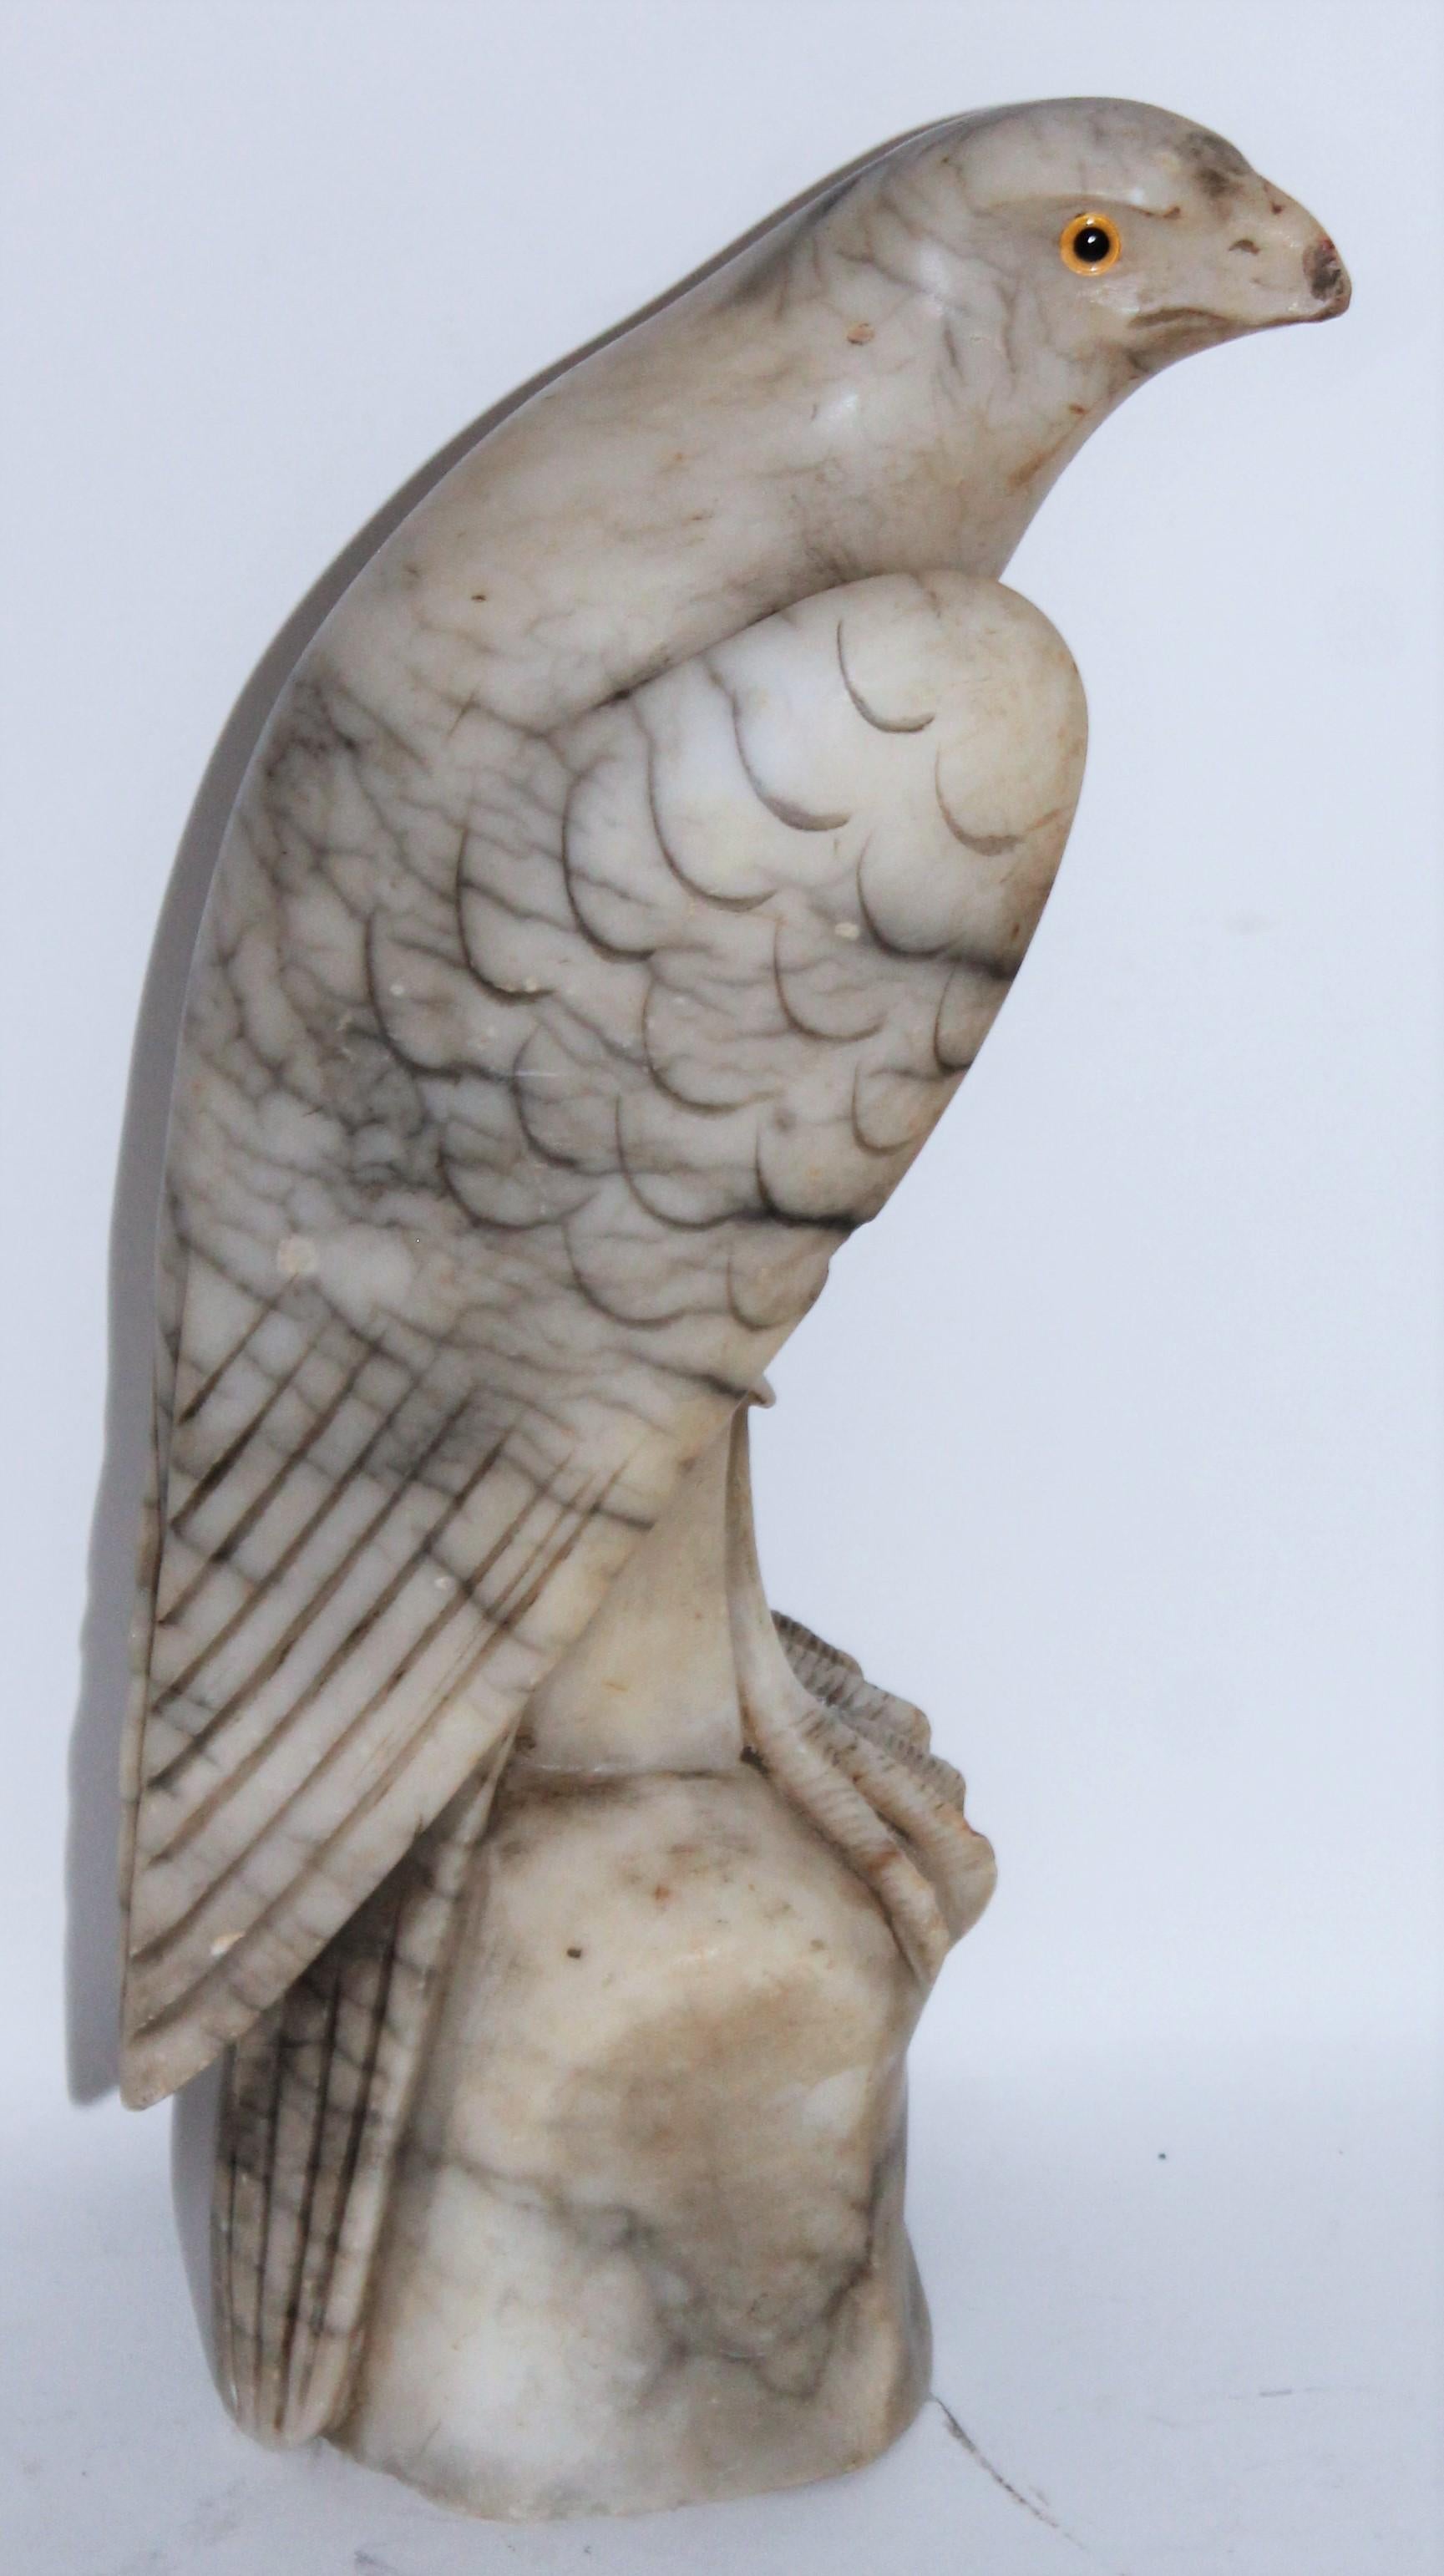 This fine hand carved alabaster hawk has the original glass eyes and in amazing condition. The body has amazing carving details. This sculpture is very fine and well carved.